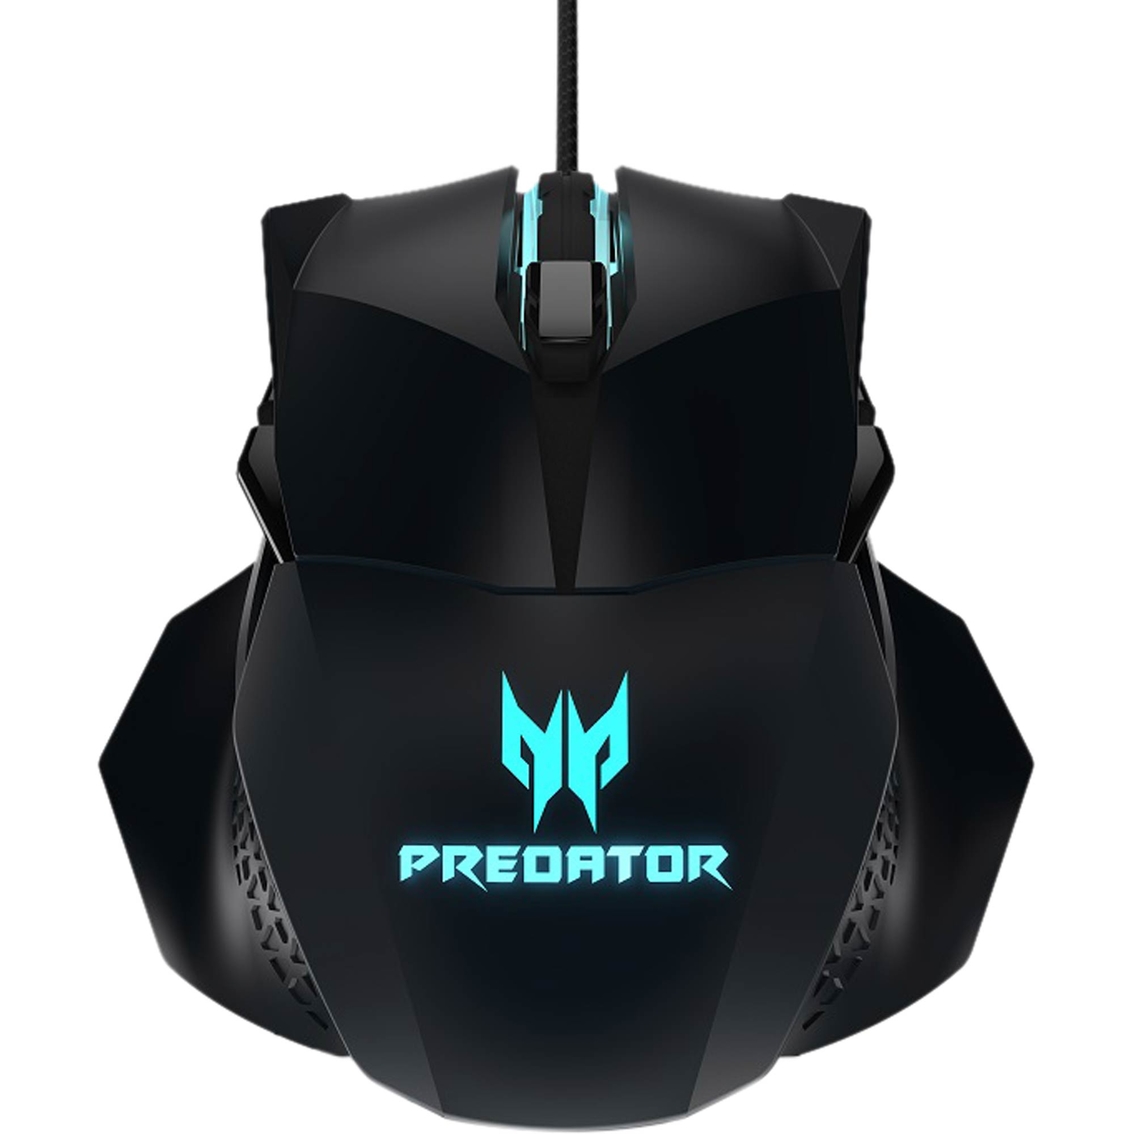 Acer Predator Cestus 500 Gaming Mouse Pc Gaming Accessories Electronics Shop The Exchange